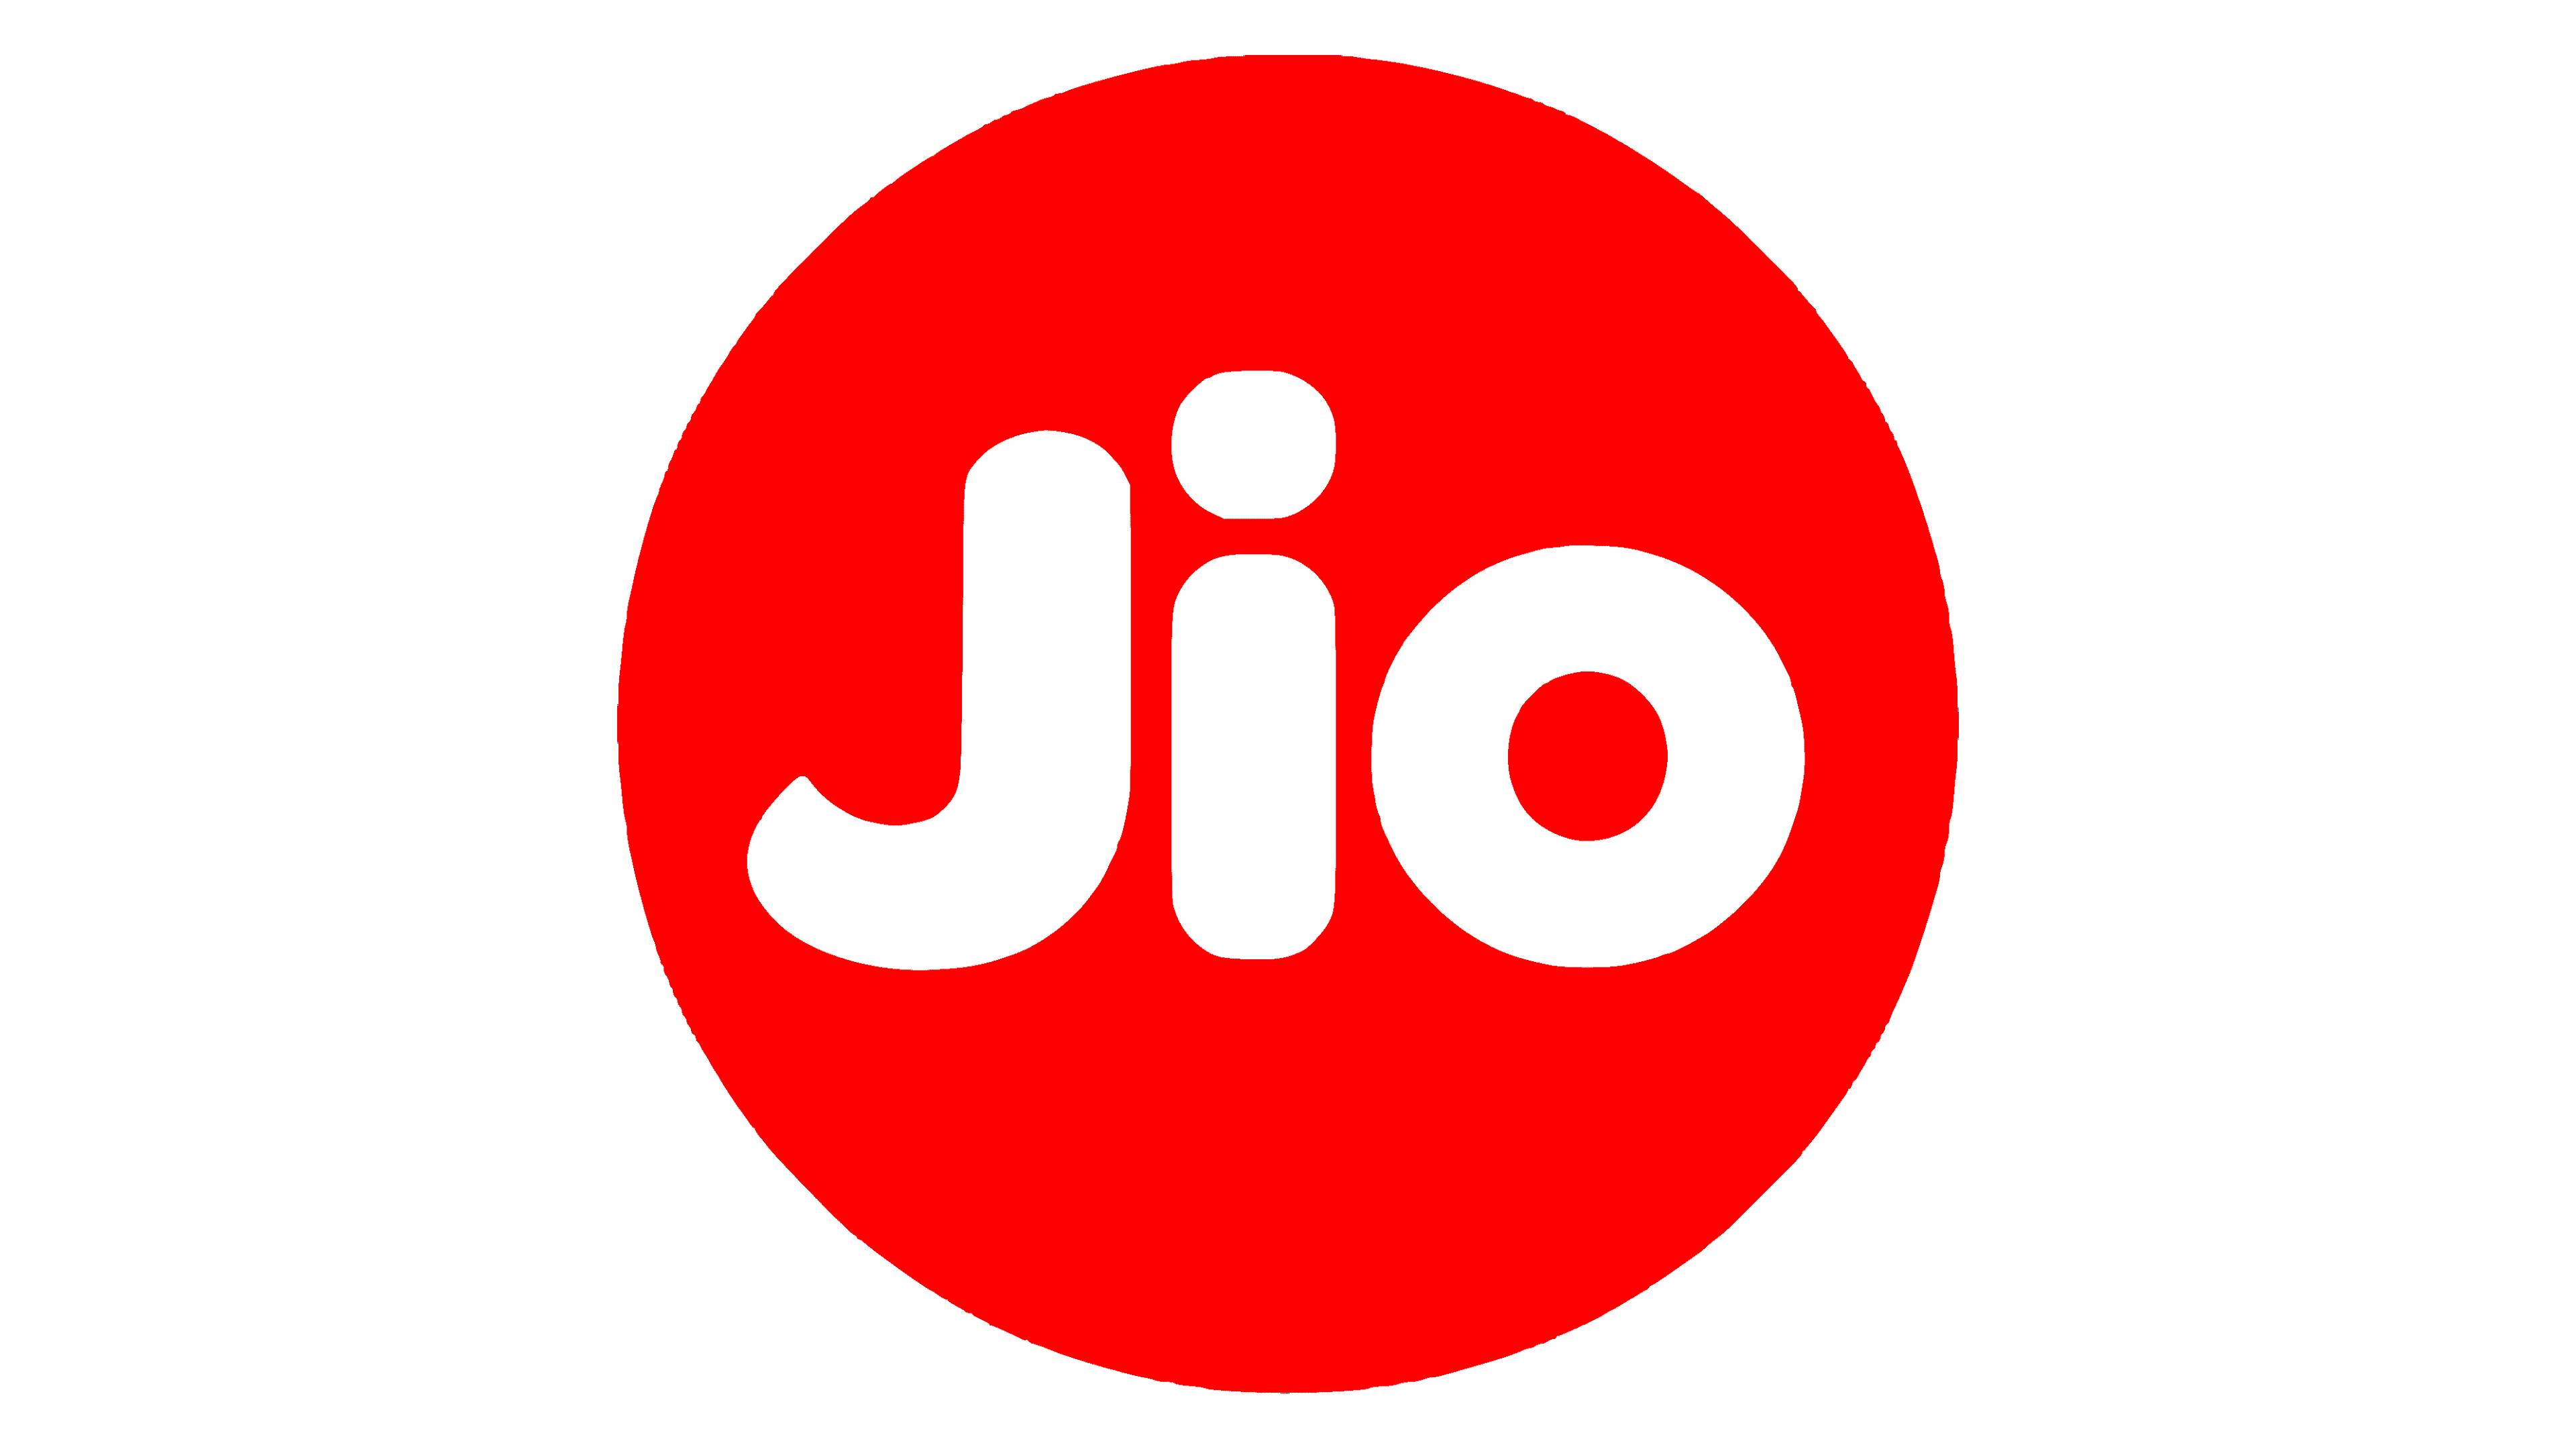 8 Reliance Jio Stock Video Footage - 4K and HD Video Clips | Shutterstock